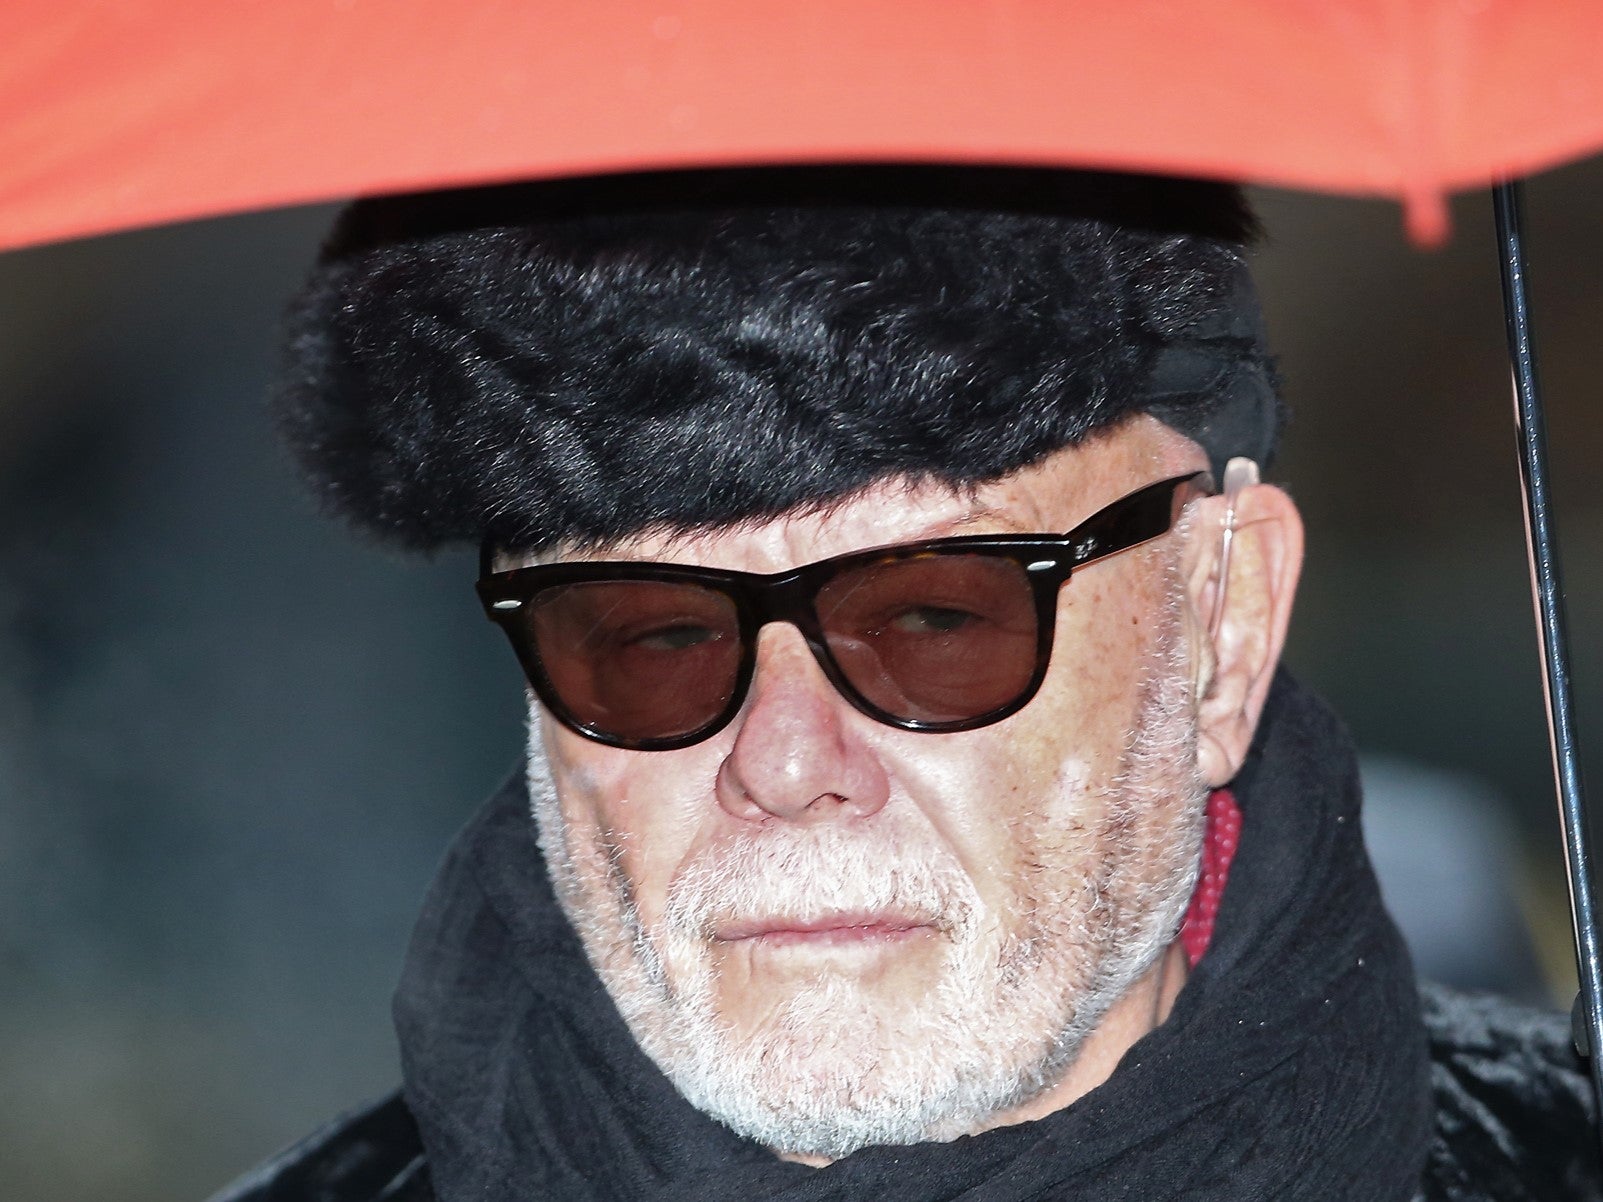 Gary Glitter, real name Paul Gadd, arrives at Southwark Crown Court on 5 February, 2015 in London, England